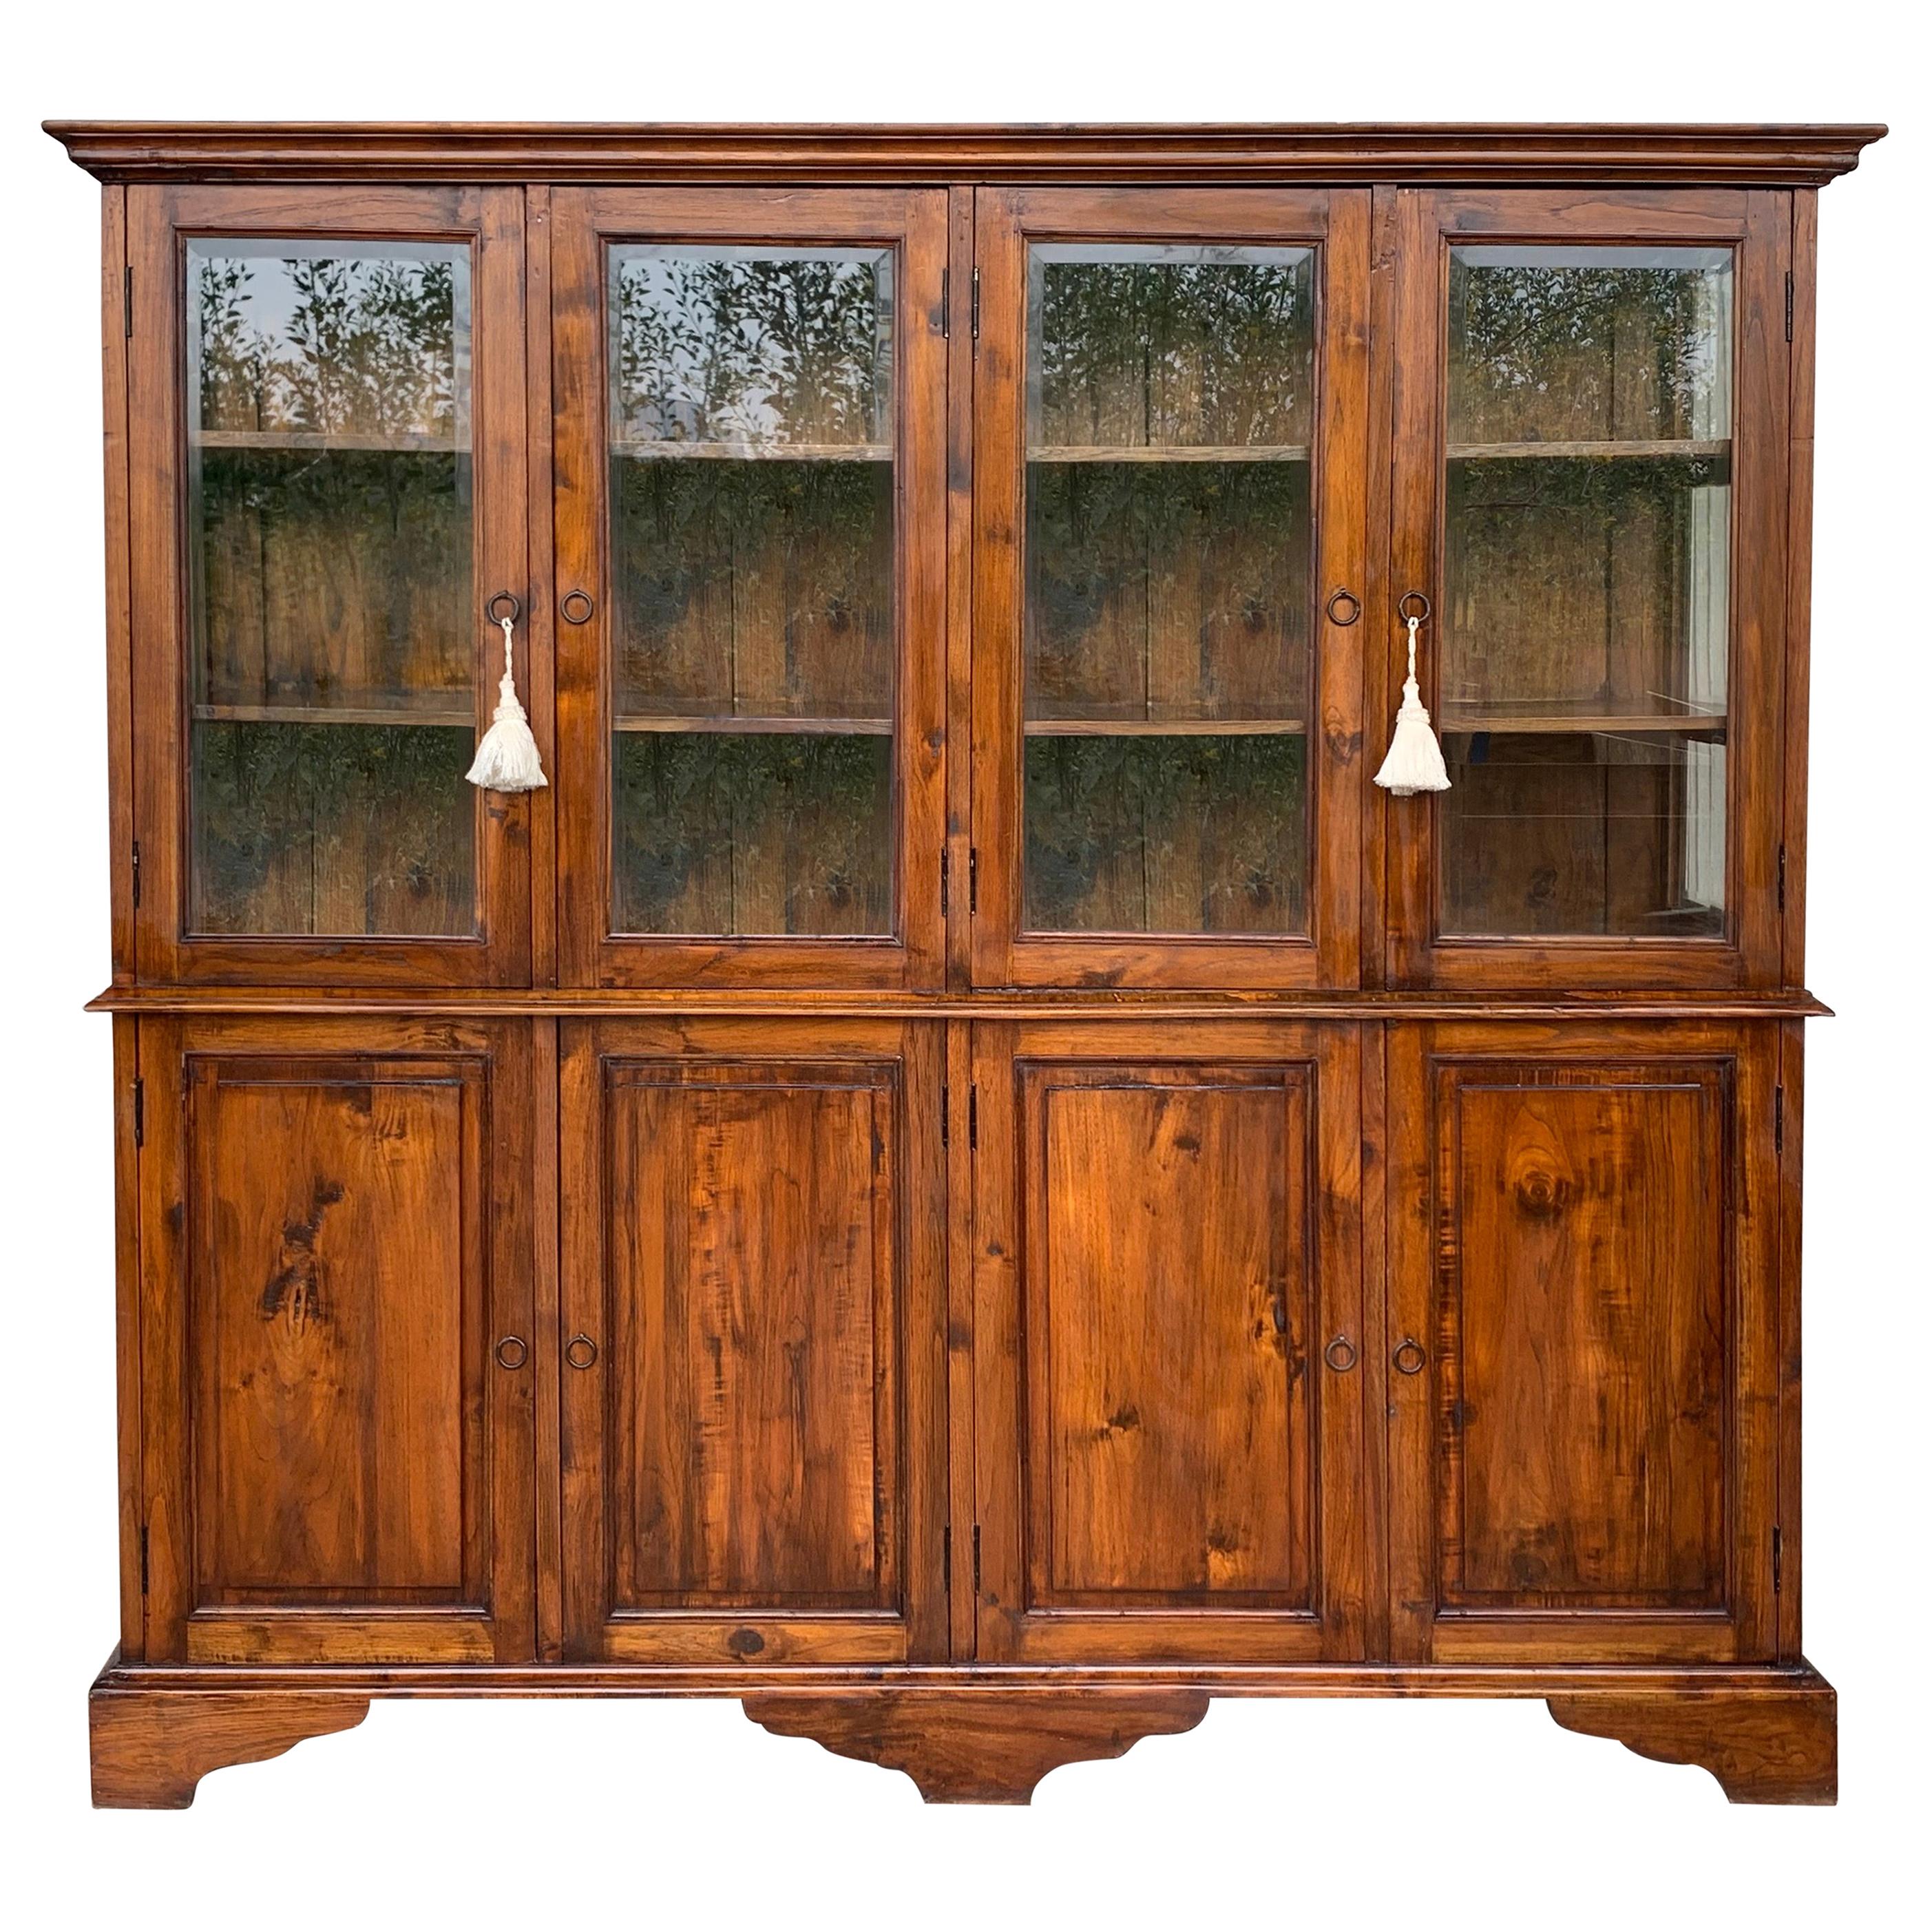 19th Century Large Cupboard or Bookcase with Glass Vitrine, Pine, Spain Restored For Sale